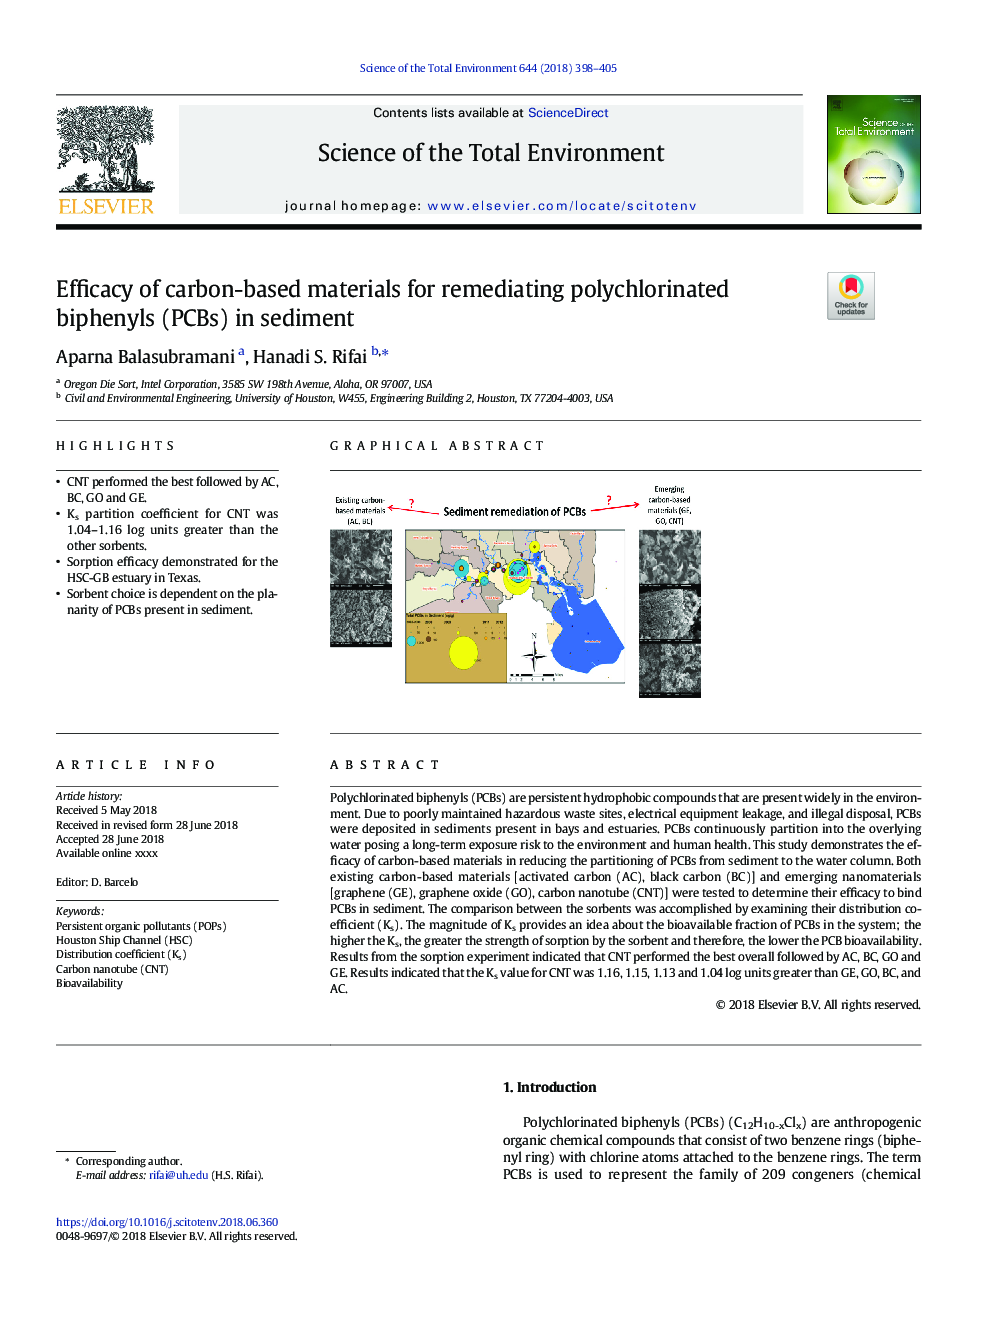 Efficacy of carbon-based materials for remediating polychlorinated biphenyls (PCBs) in sediment